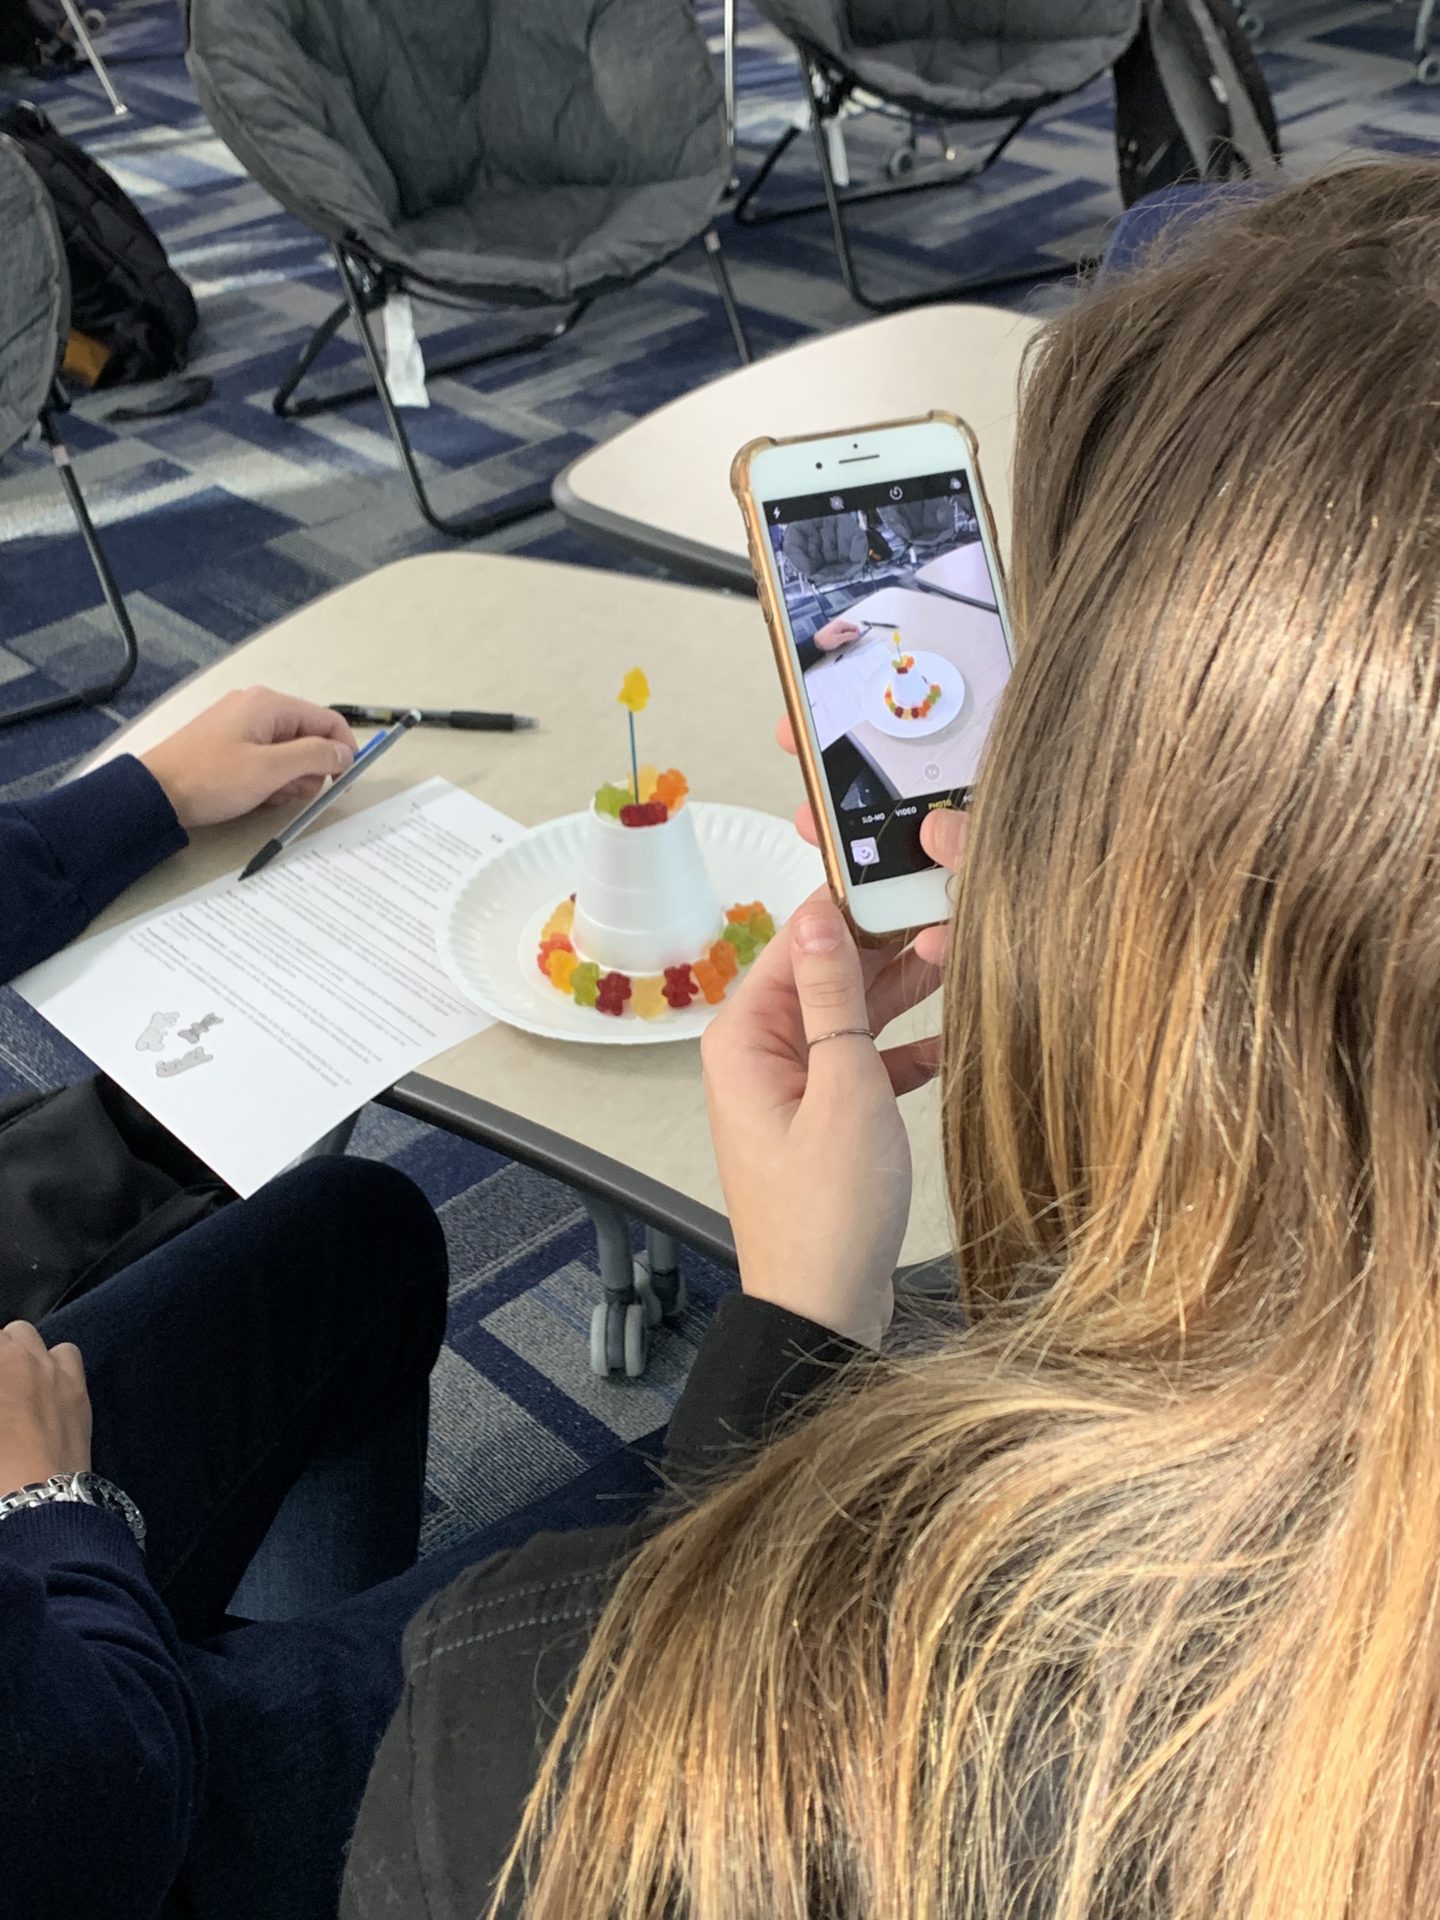 Students taking photos of their gummy bears.